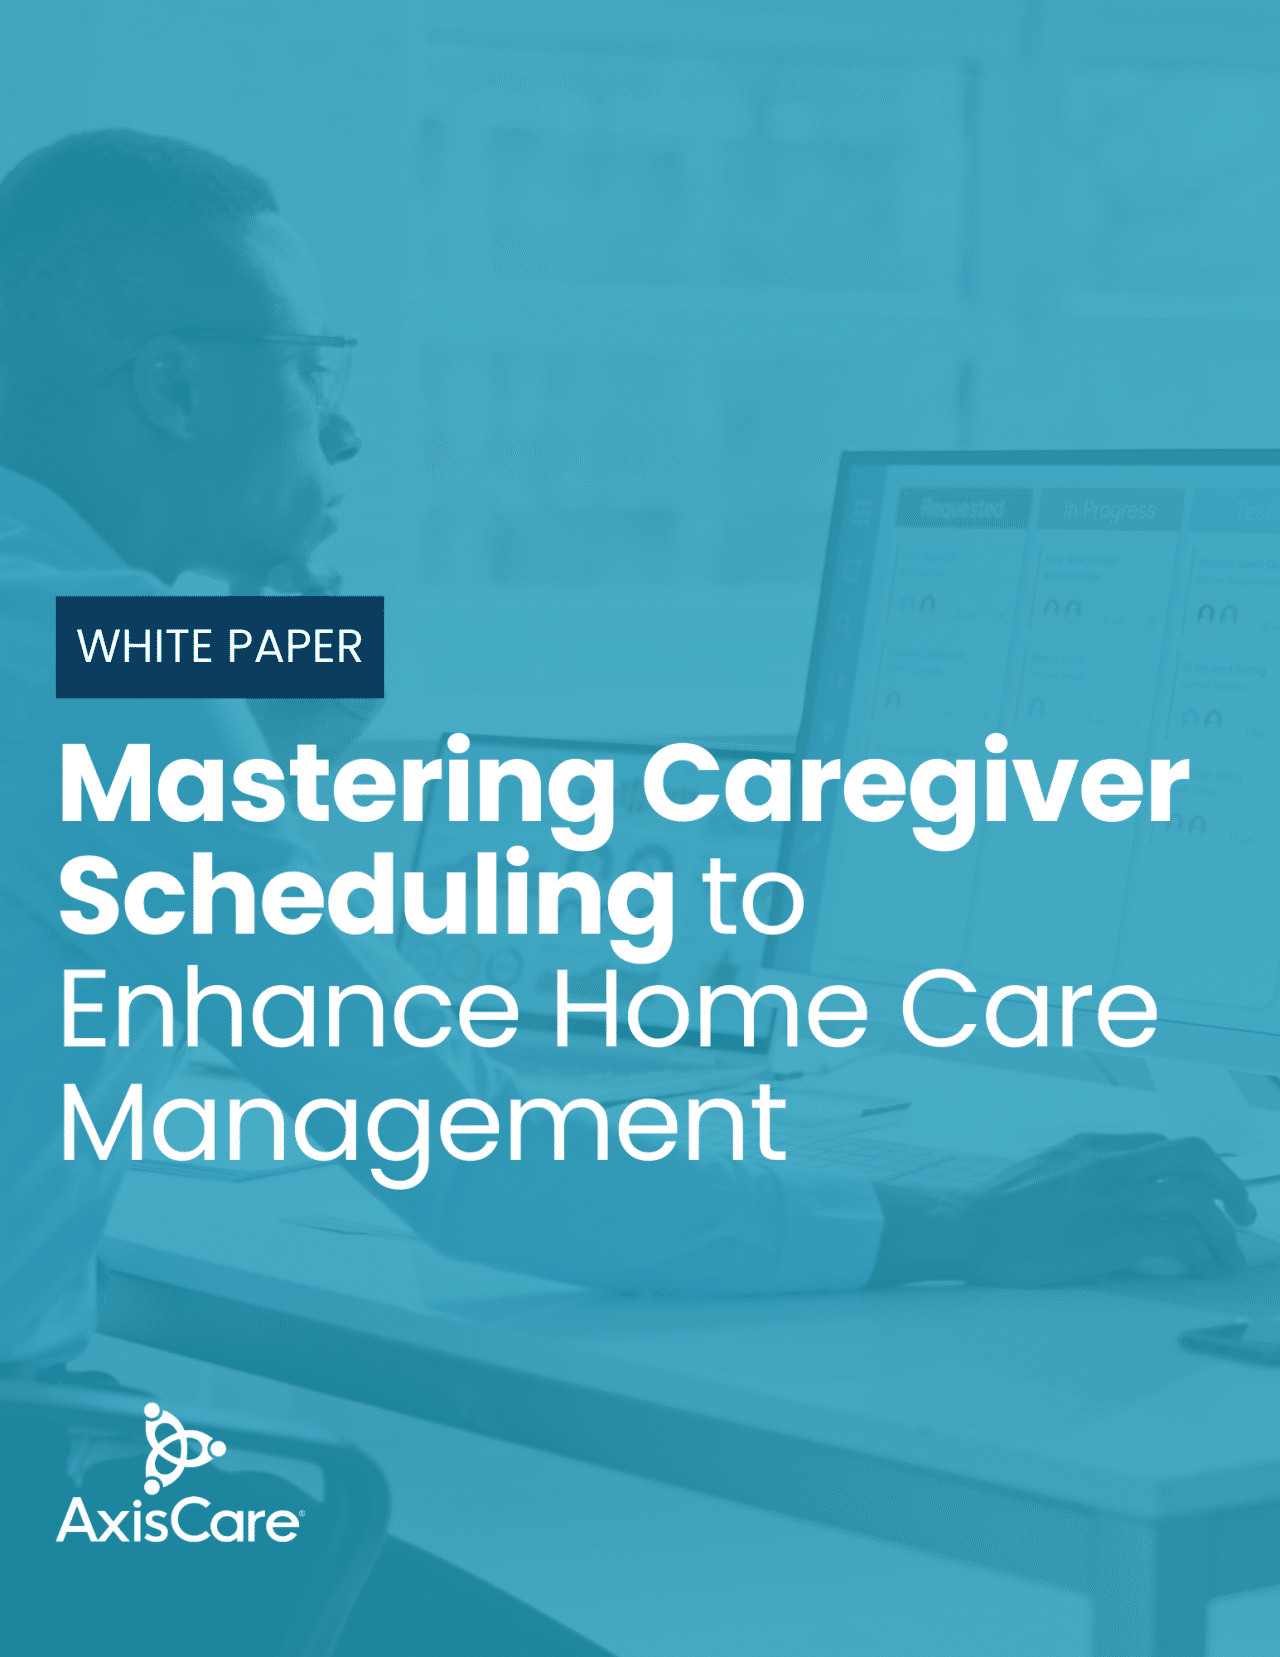 White Paper - Mastering Caregiver Scheduling to Enhance Home Care Management